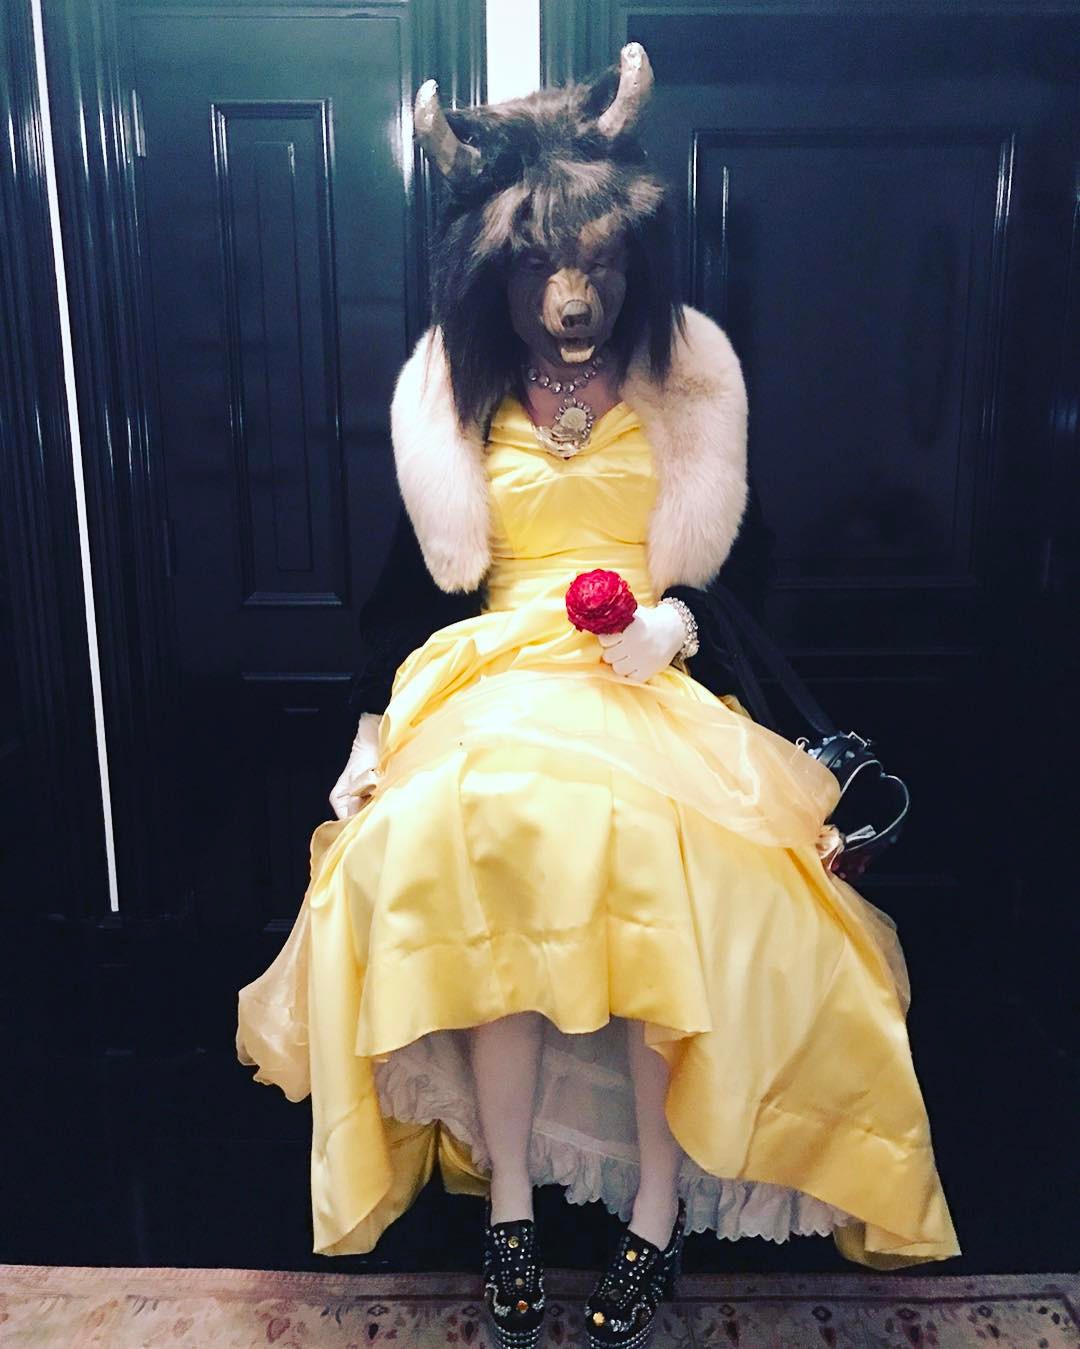 Madonna Attended A Purim Party Dressed Up As Both Beauty and the Beast